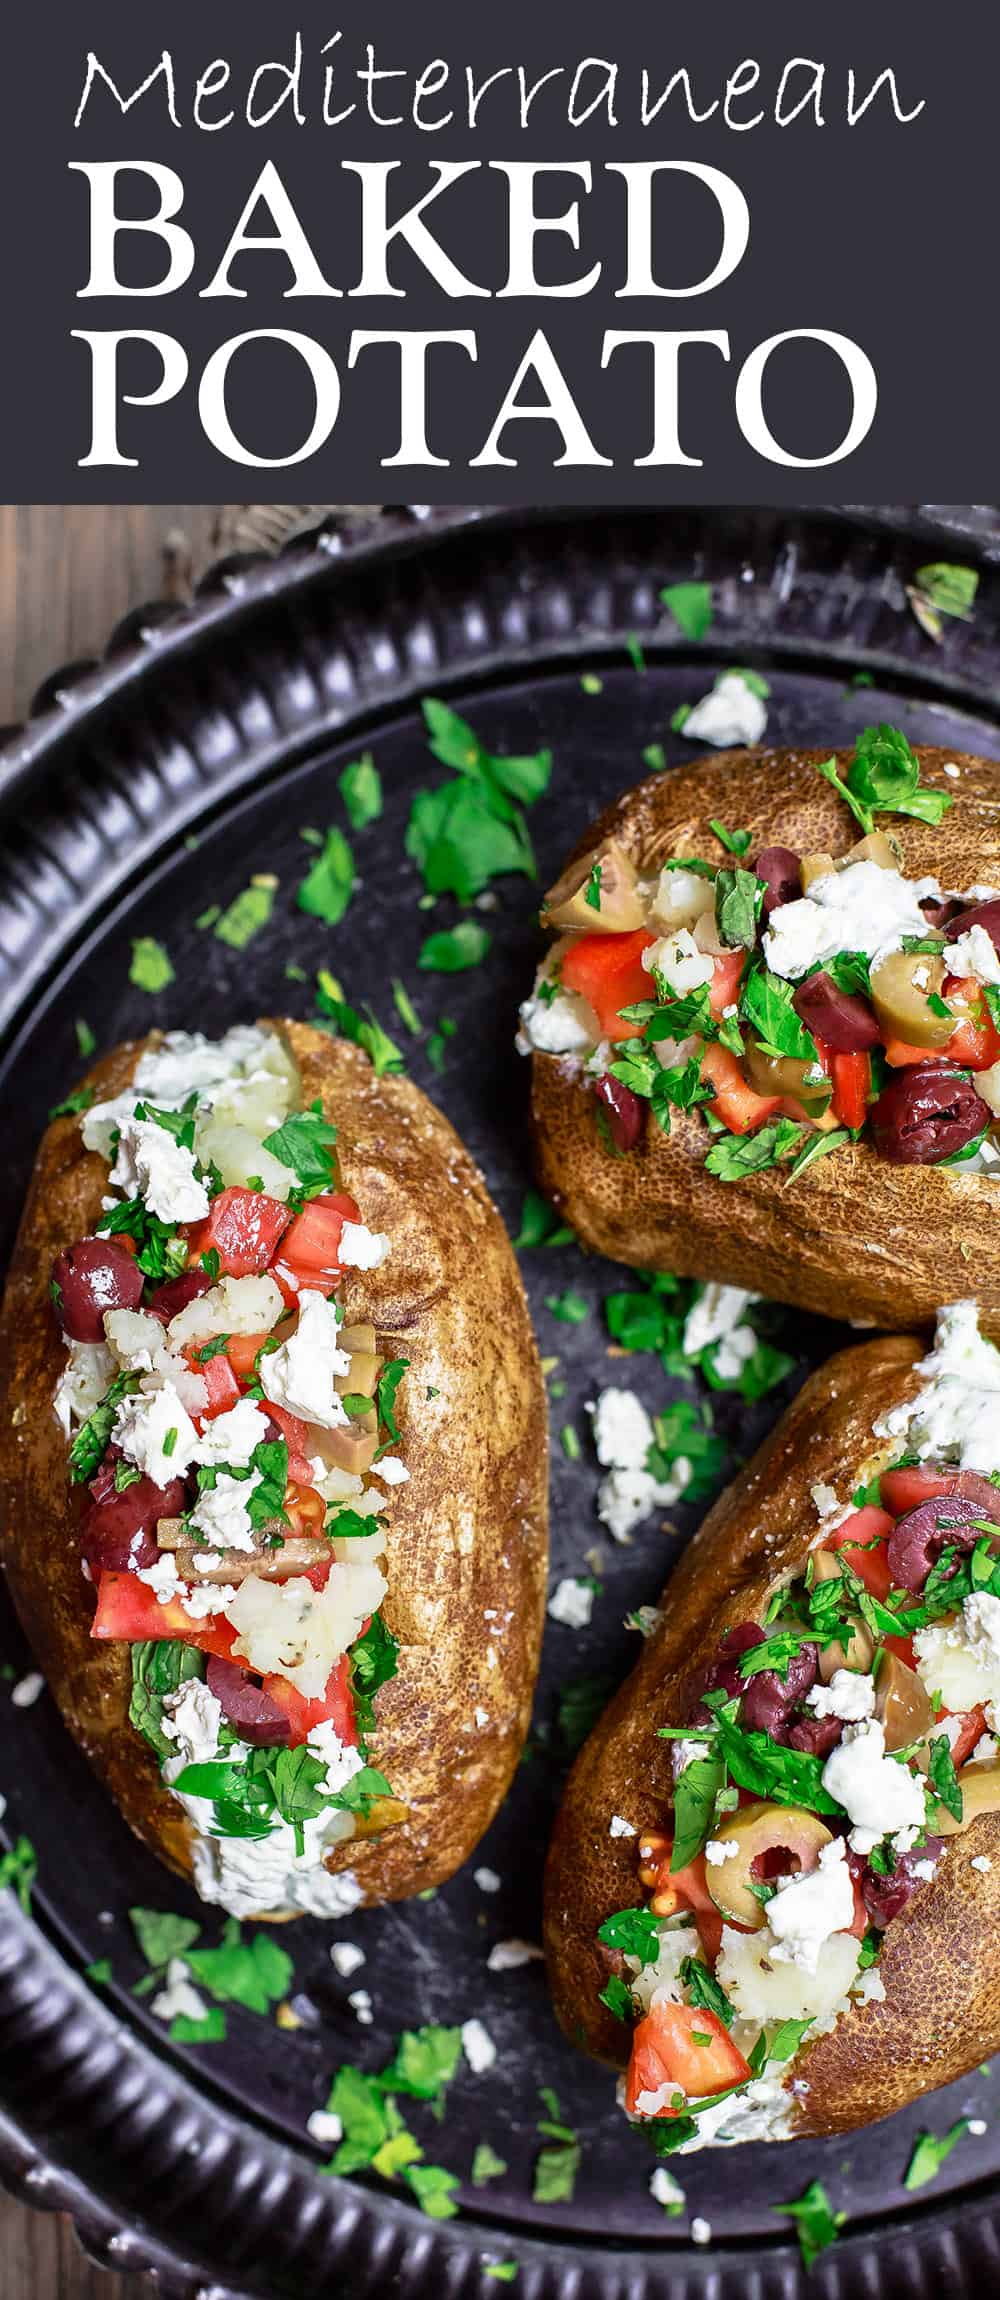 Mediterranean Loaded Baked Potato Recipe | The Mediterranean Dish. Crispy skinned baked potato, so creamy and fluffy on the inside. Topped with Tzatziki sauce, tomatoes, feta, olives and more. A healthier loaded baked potato with tons for flavor! Get the easy recipe on TheMediterraneanDish.com